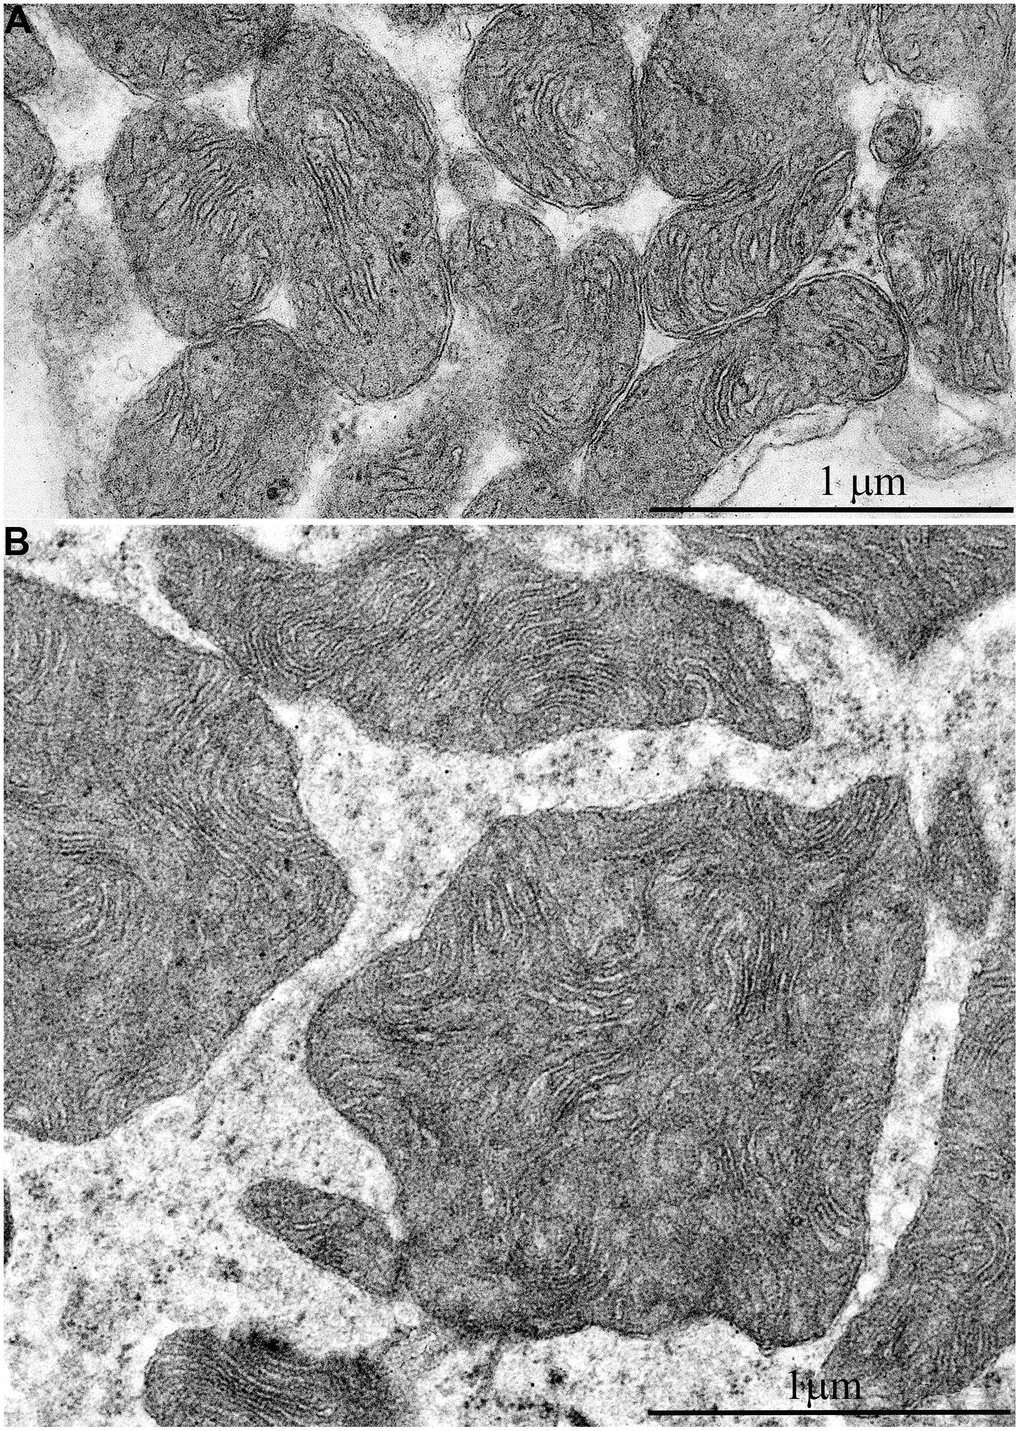 Comparison of ultrastructures of mitochondria in skeletal muscle fibers of naked mole rats of two different ages is shown at the same magnification: (A) Skeletal muscle mitochondria at the age of 6 months; (B) Skeletal muscle mitochondria at the age of 11 years.